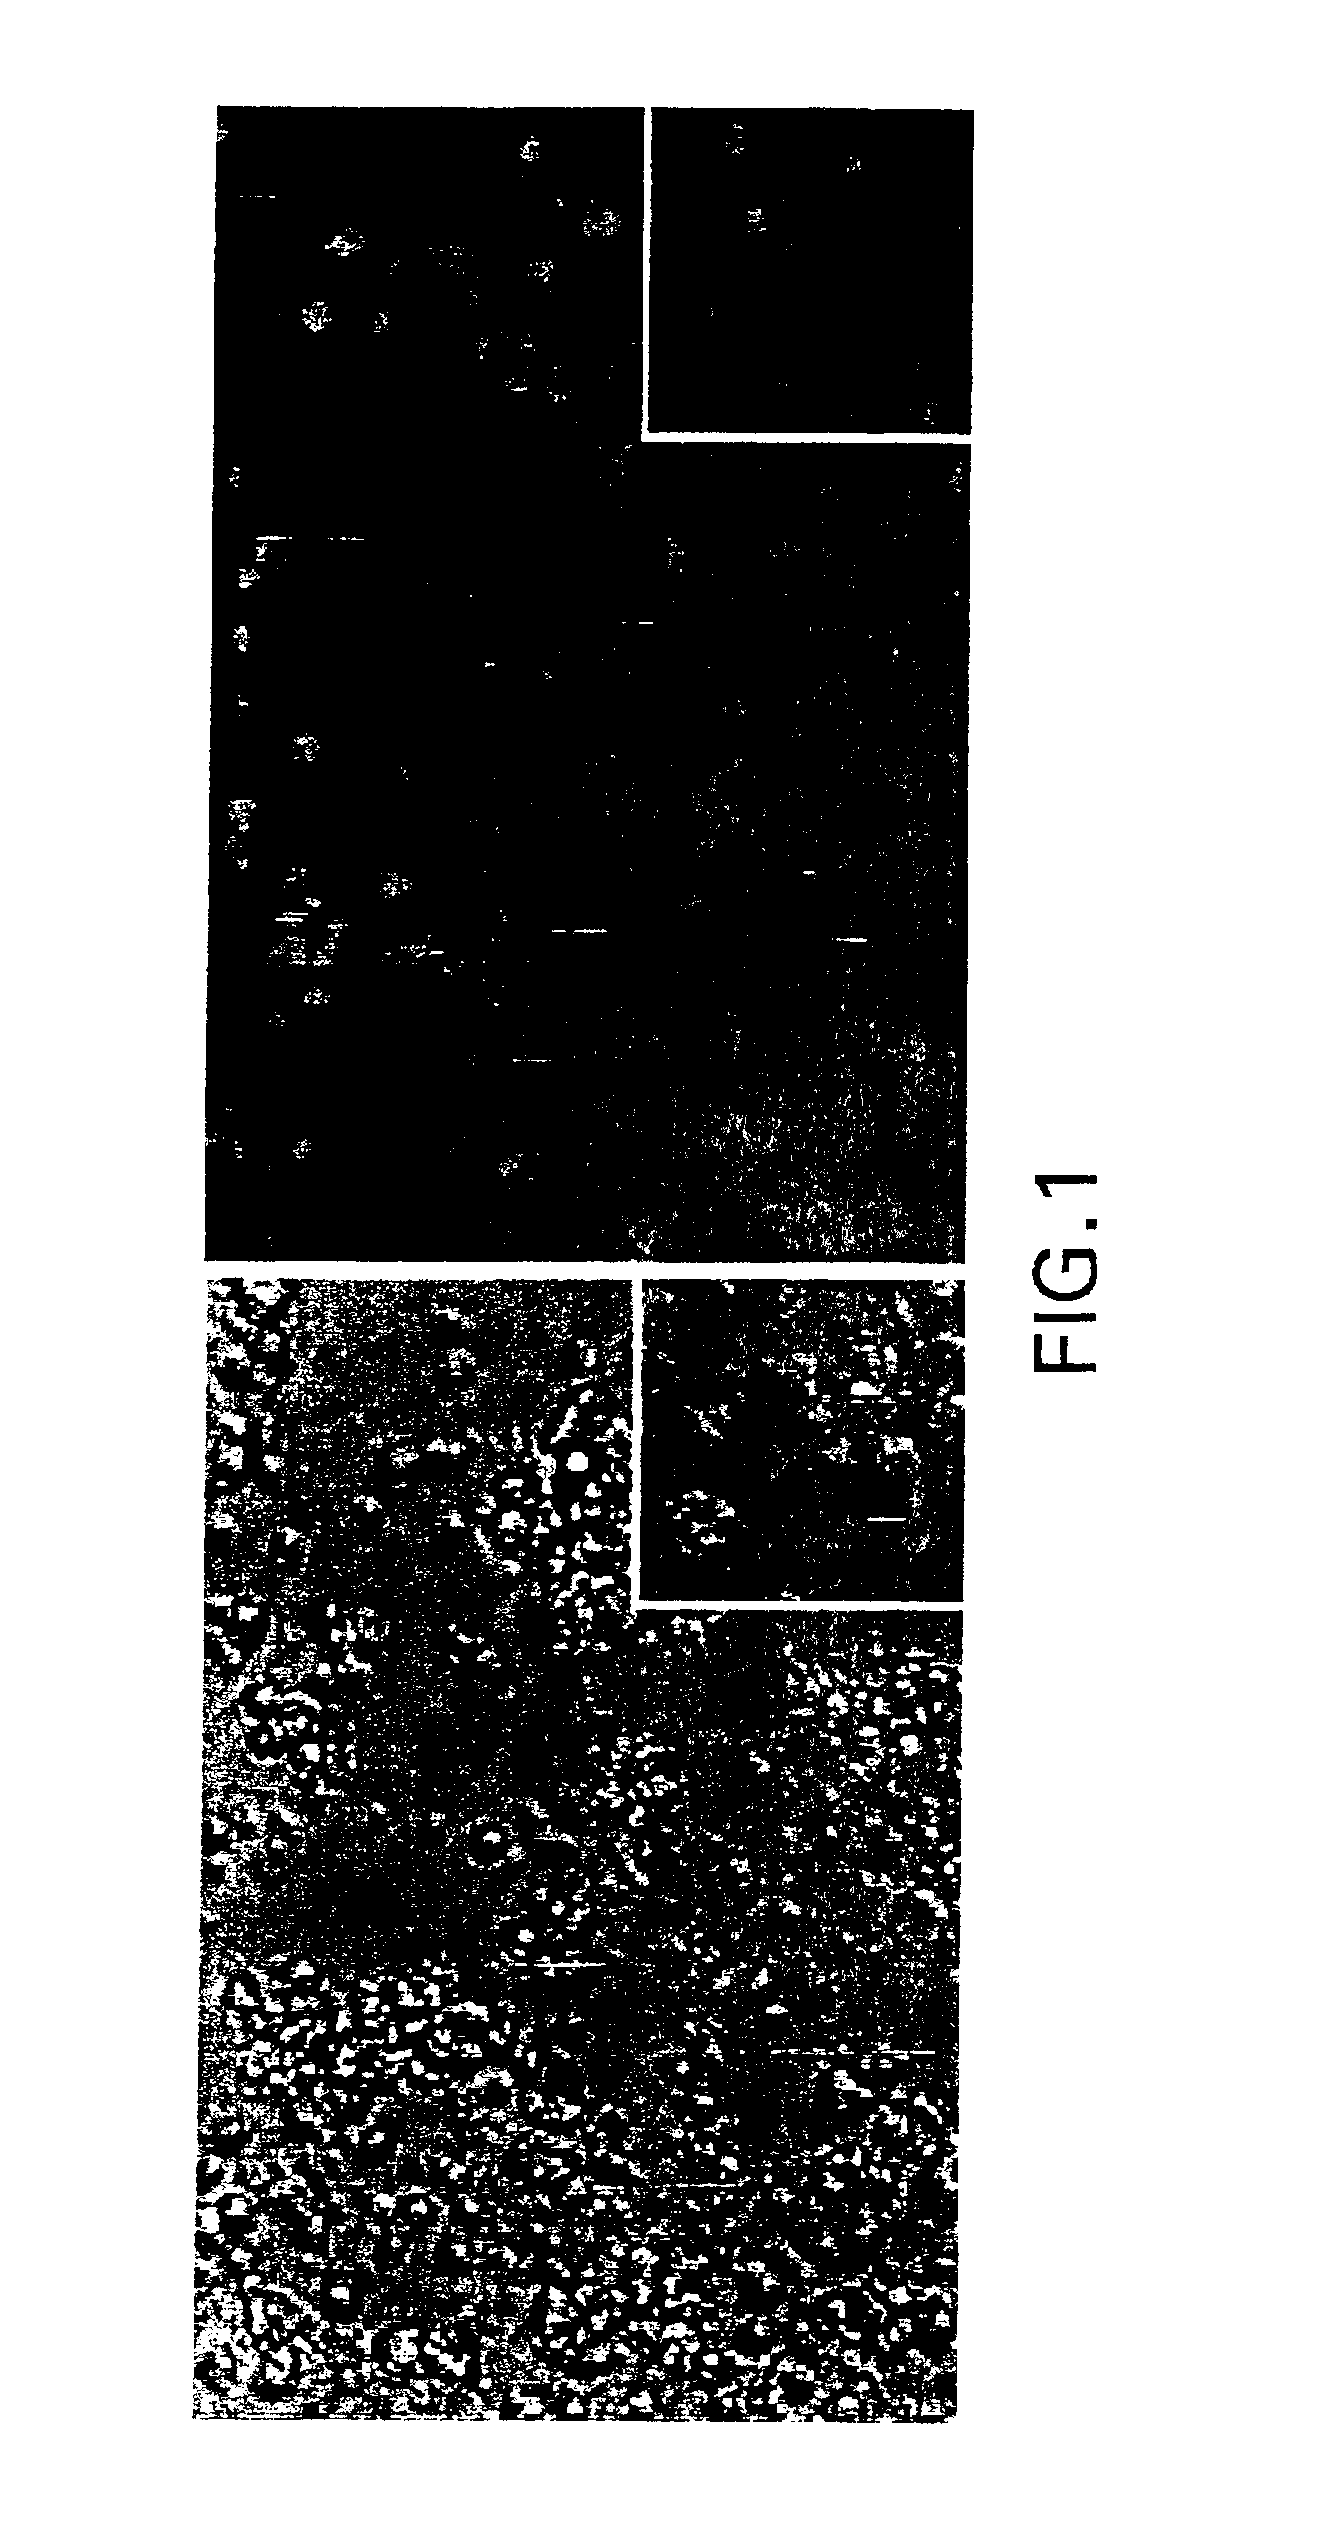 Use of tolerogenic dendritic cells for enhancing tolerogenicity in a host and methods for making the same